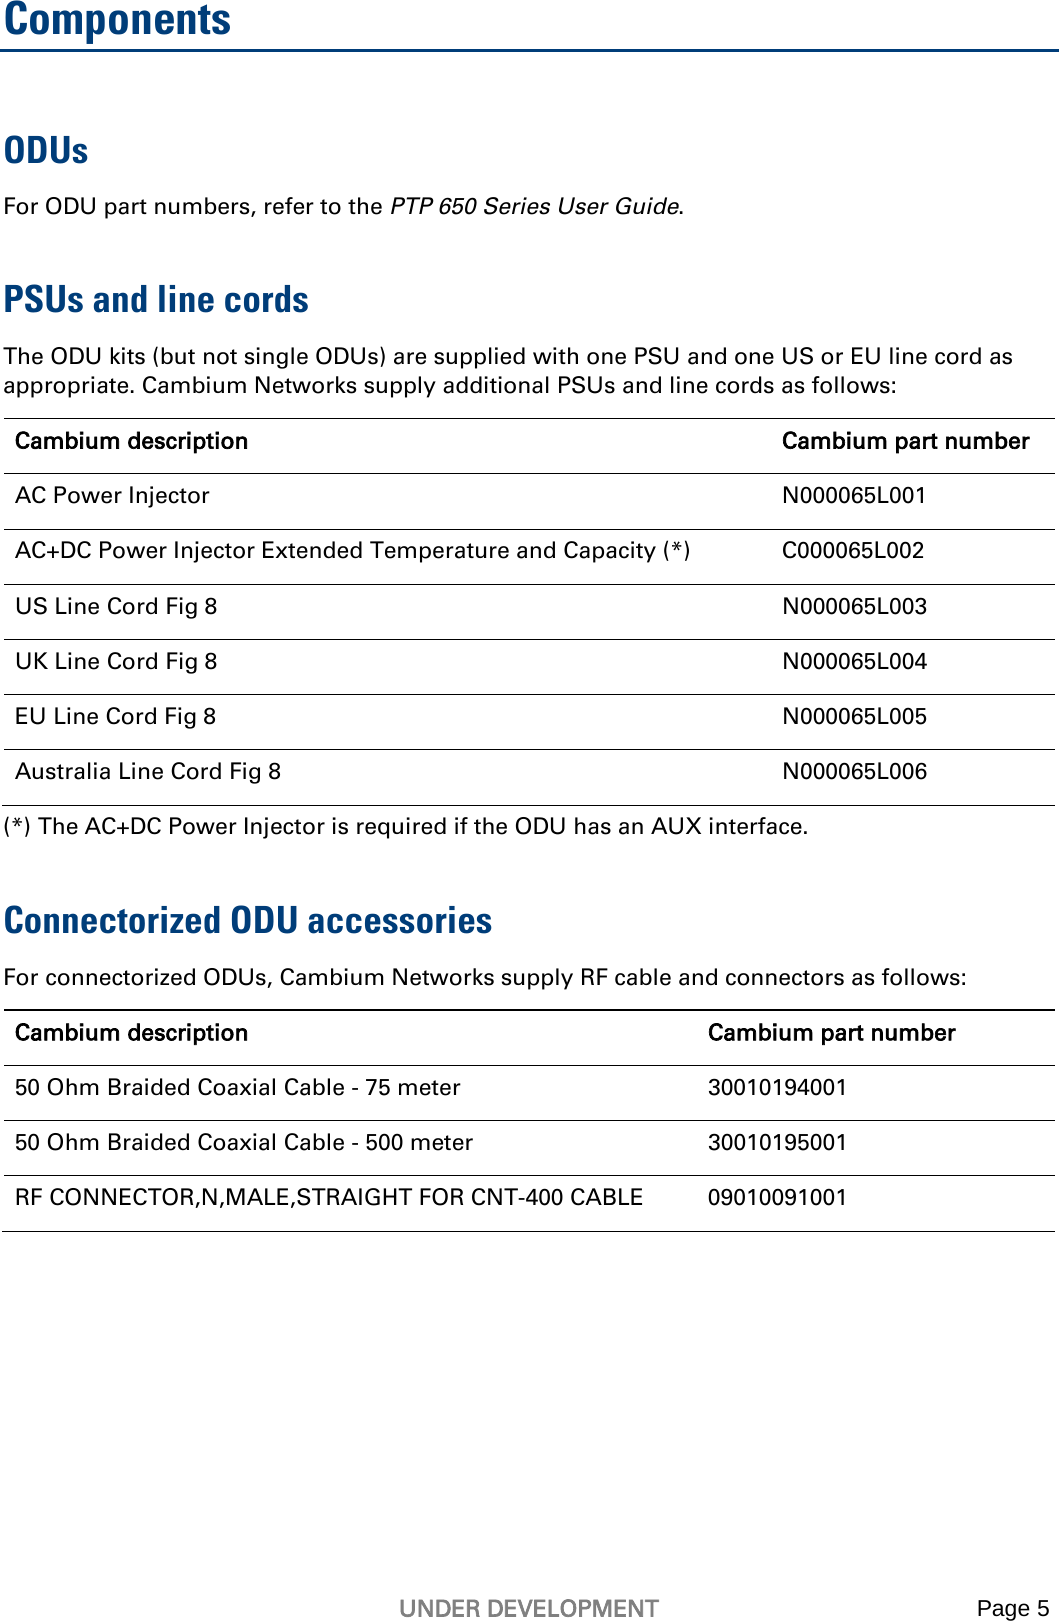   UNDER DEVELOPMENT Page 5  Components ODUs For ODU part numbers, refer to the PTP 650 Series User Guide. PSUs and line cords The ODU kits (but not single ODUs) are supplied with one PSU and one US or EU line cord as appropriate. Cambium Networks supply additional PSUs and line cords as follows: Cambium description Cambium part number AC Power Injector N000065L001 AC+DC Power Injector Extended Temperature and Capacity (*) C000065L002 US Line Cord Fig 8 N000065L003 UK Line Cord Fig 8 N000065L004 EU Line Cord Fig 8 N000065L005 Australia Line Cord Fig 8 N000065L006 (*) The AC+DC Power Injector is required if the ODU has an AUX interface. Connectorized ODU accessories For connectorized ODUs, Cambium Networks supply RF cable and connectors as follows: Cambium description Cambium part number 50 Ohm Braided Coaxial Cable - 75 meter 30010194001 50 Ohm Braided Coaxial Cable - 500 meter 30010195001 RF CONNECTOR,N,MALE,STRAIGHT FOR CNT-400 CABLE 09010091001  